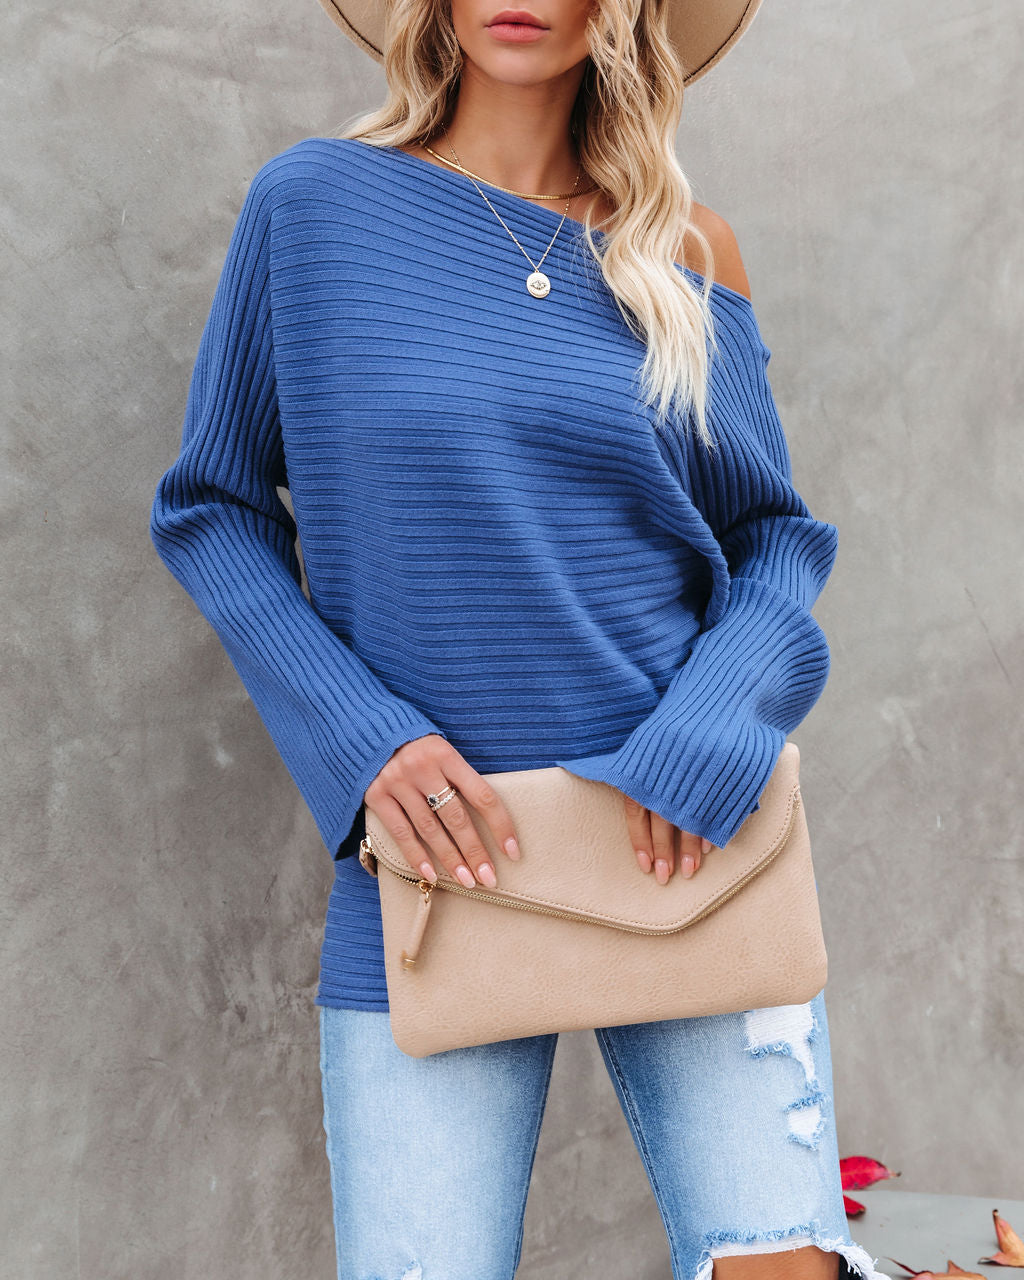 This Time Around Ribbed Dolman Sweater - Cobalt Blue